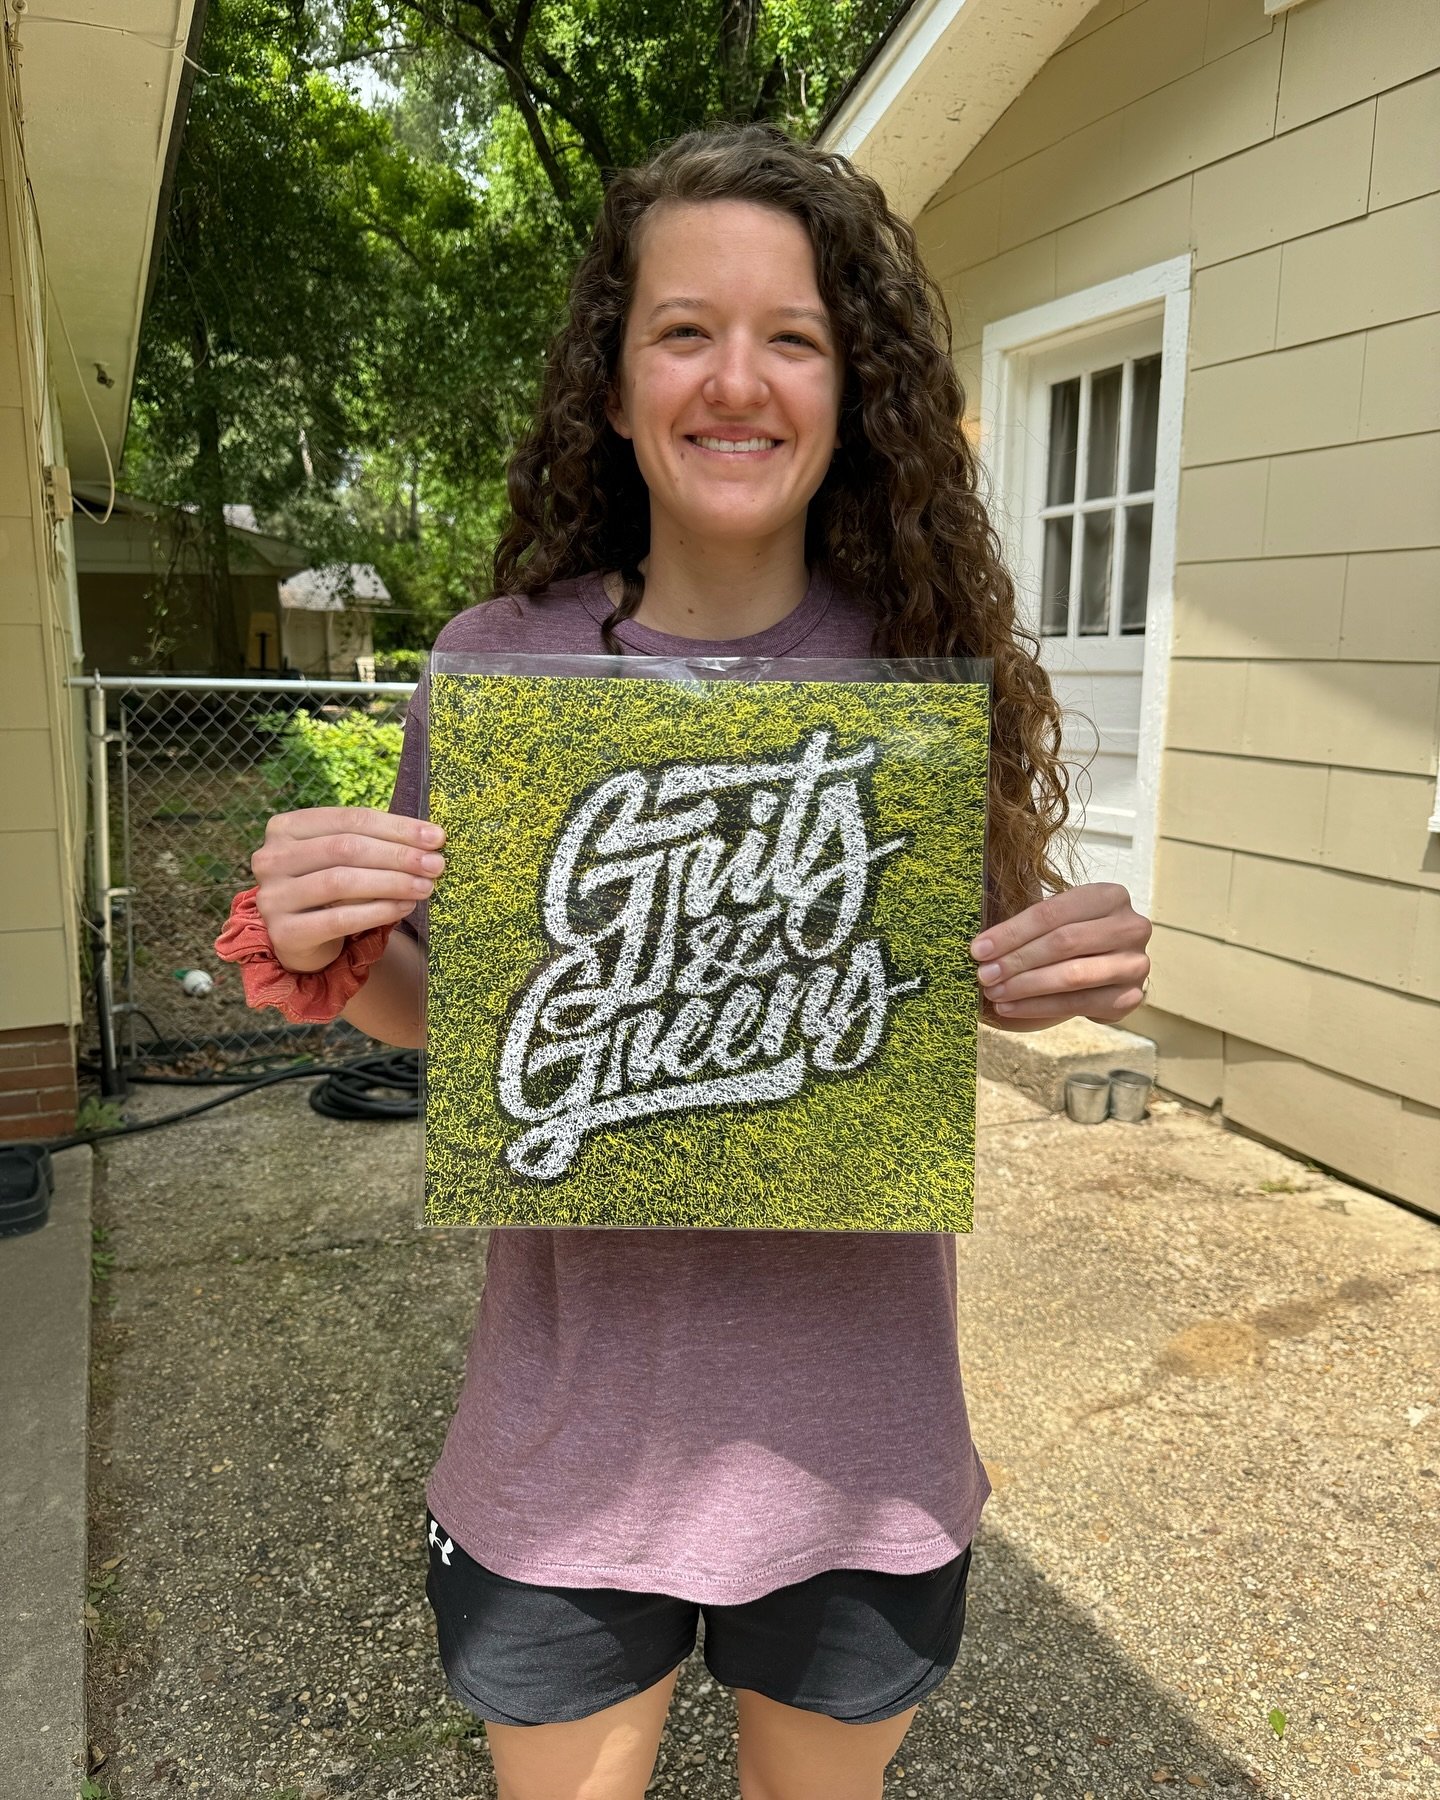 Please join the band in wishing @ryannmcgheezy a very happy 28th birthday! Ryann is behind the scenes in all things Grits &amp; Greens, she is the accountant, the content maker, the organizer, the tour manager, the multi-instrumentalist, and the powe